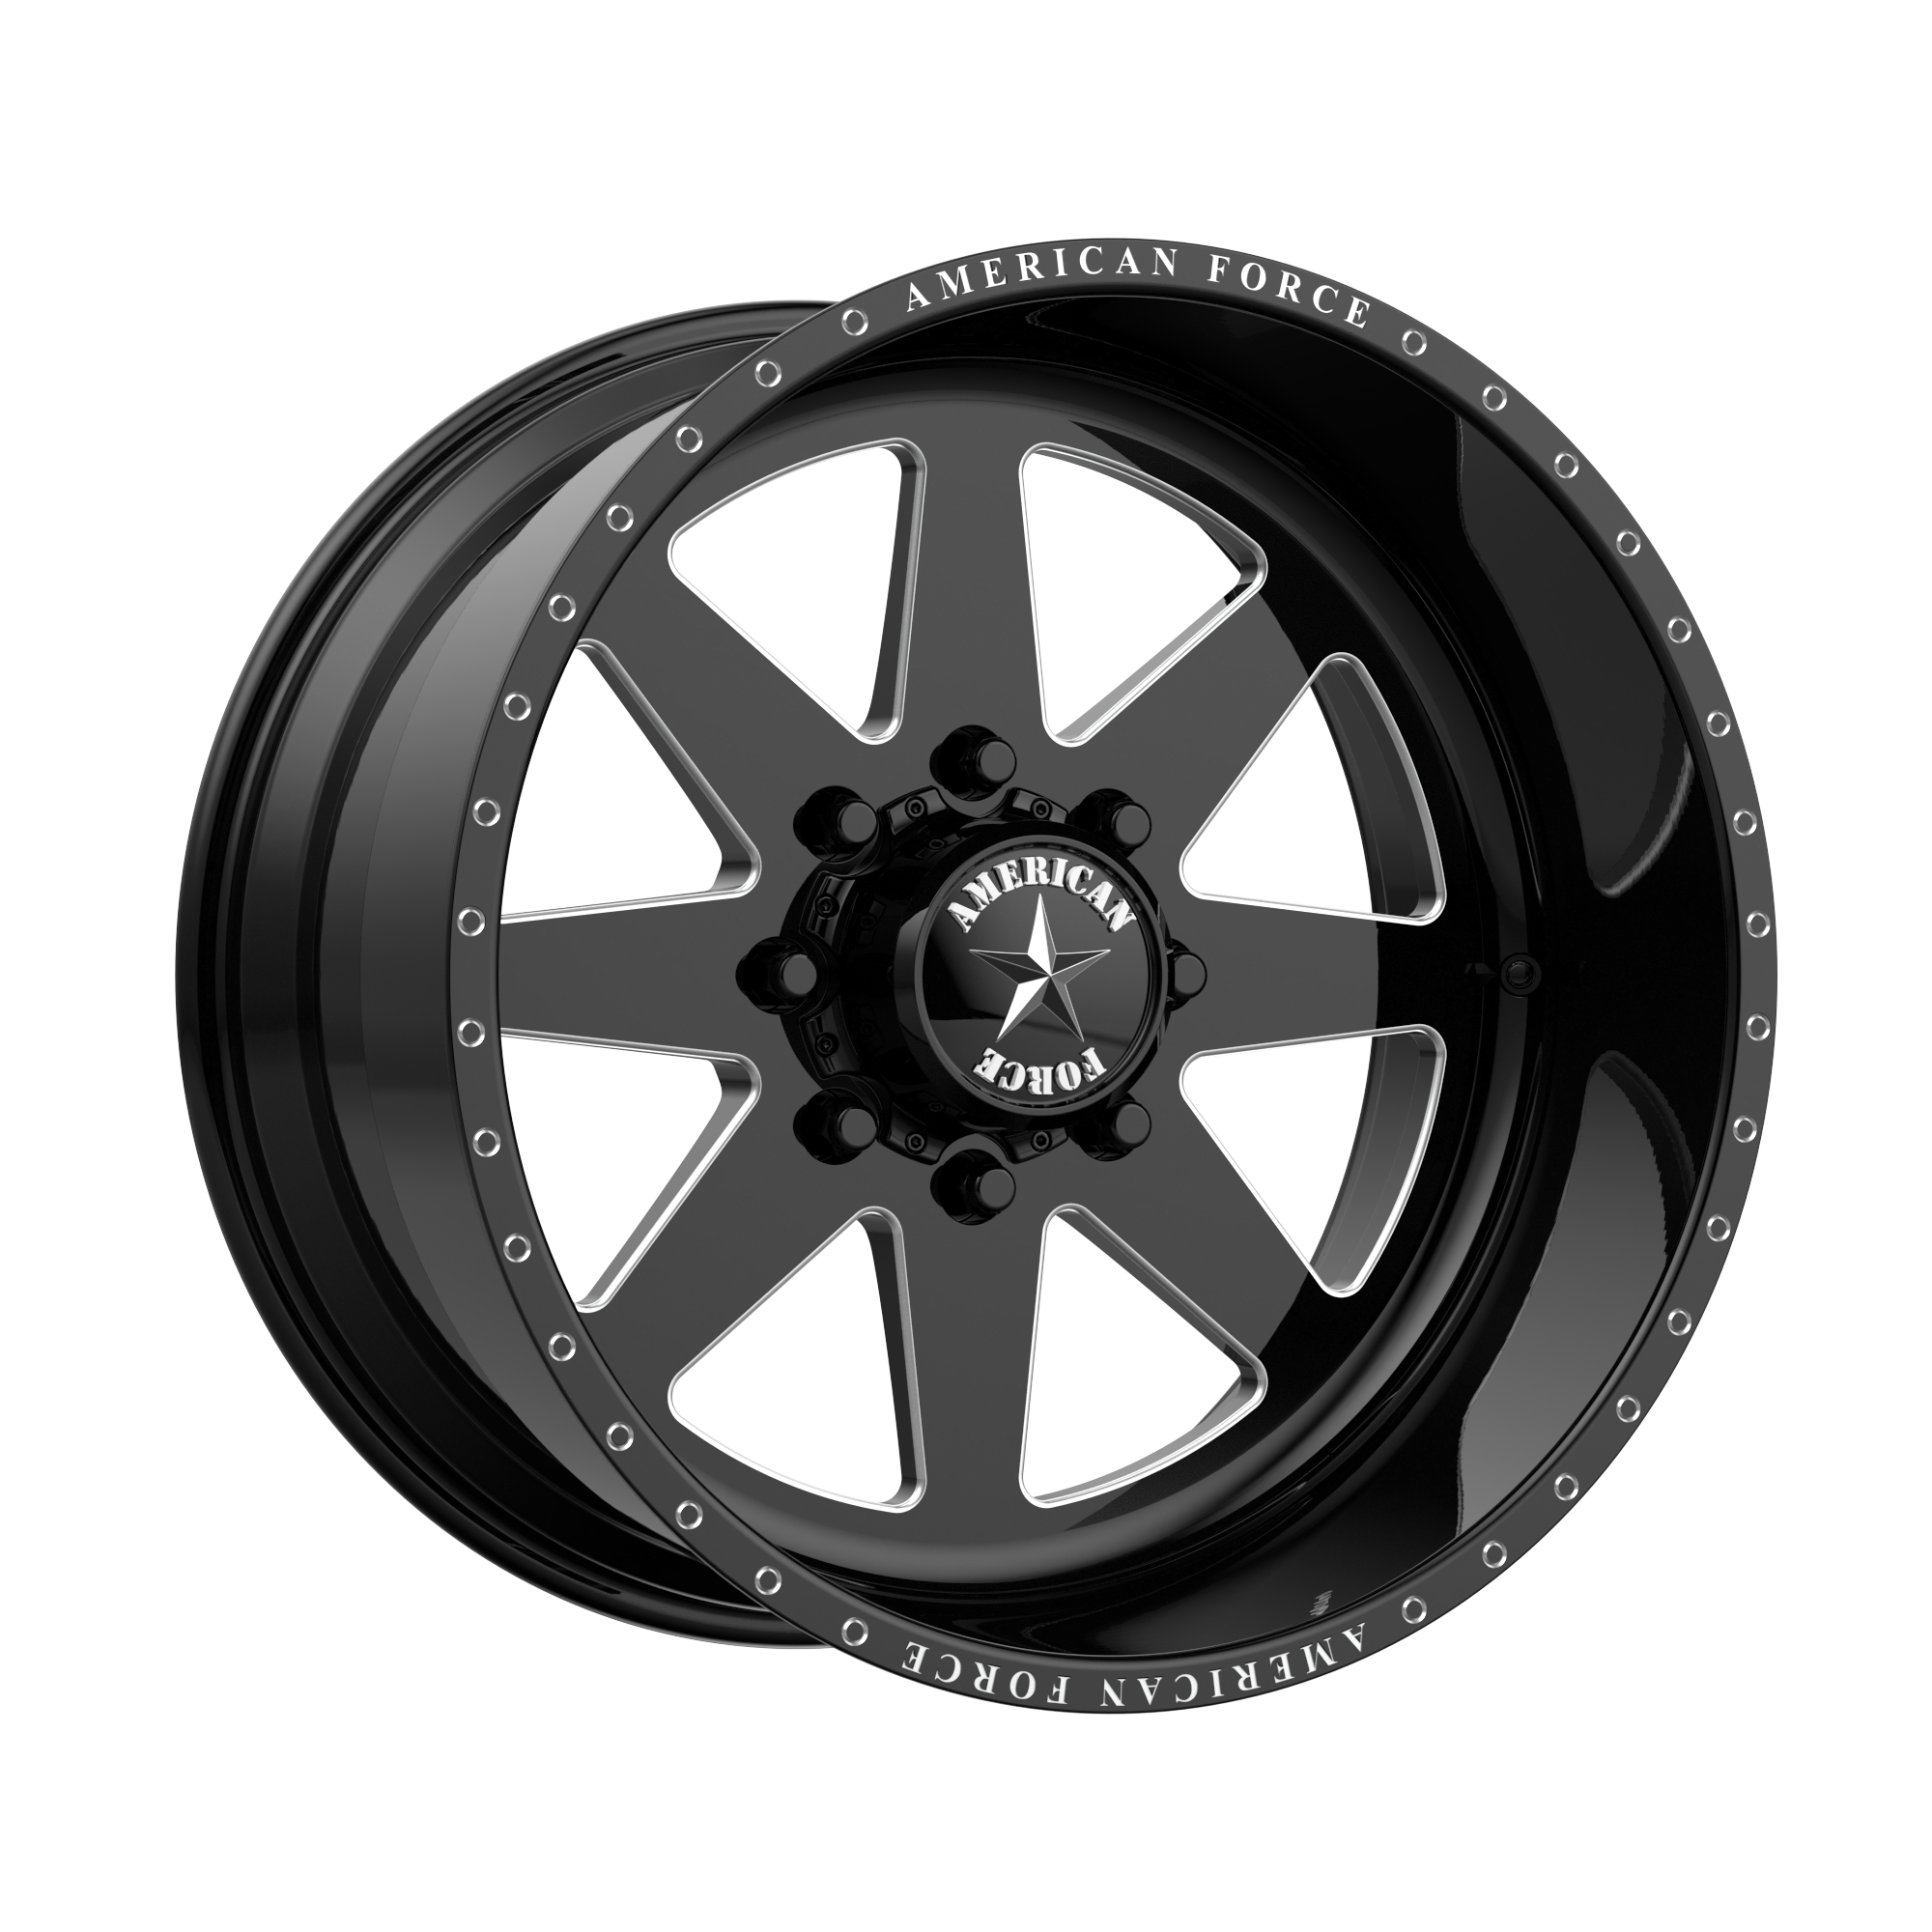 INDEPENDENCE SS 20x14 6x135.00 GLOSS BLACK MACHINED (-73 mm) - Tires and Engine Performance